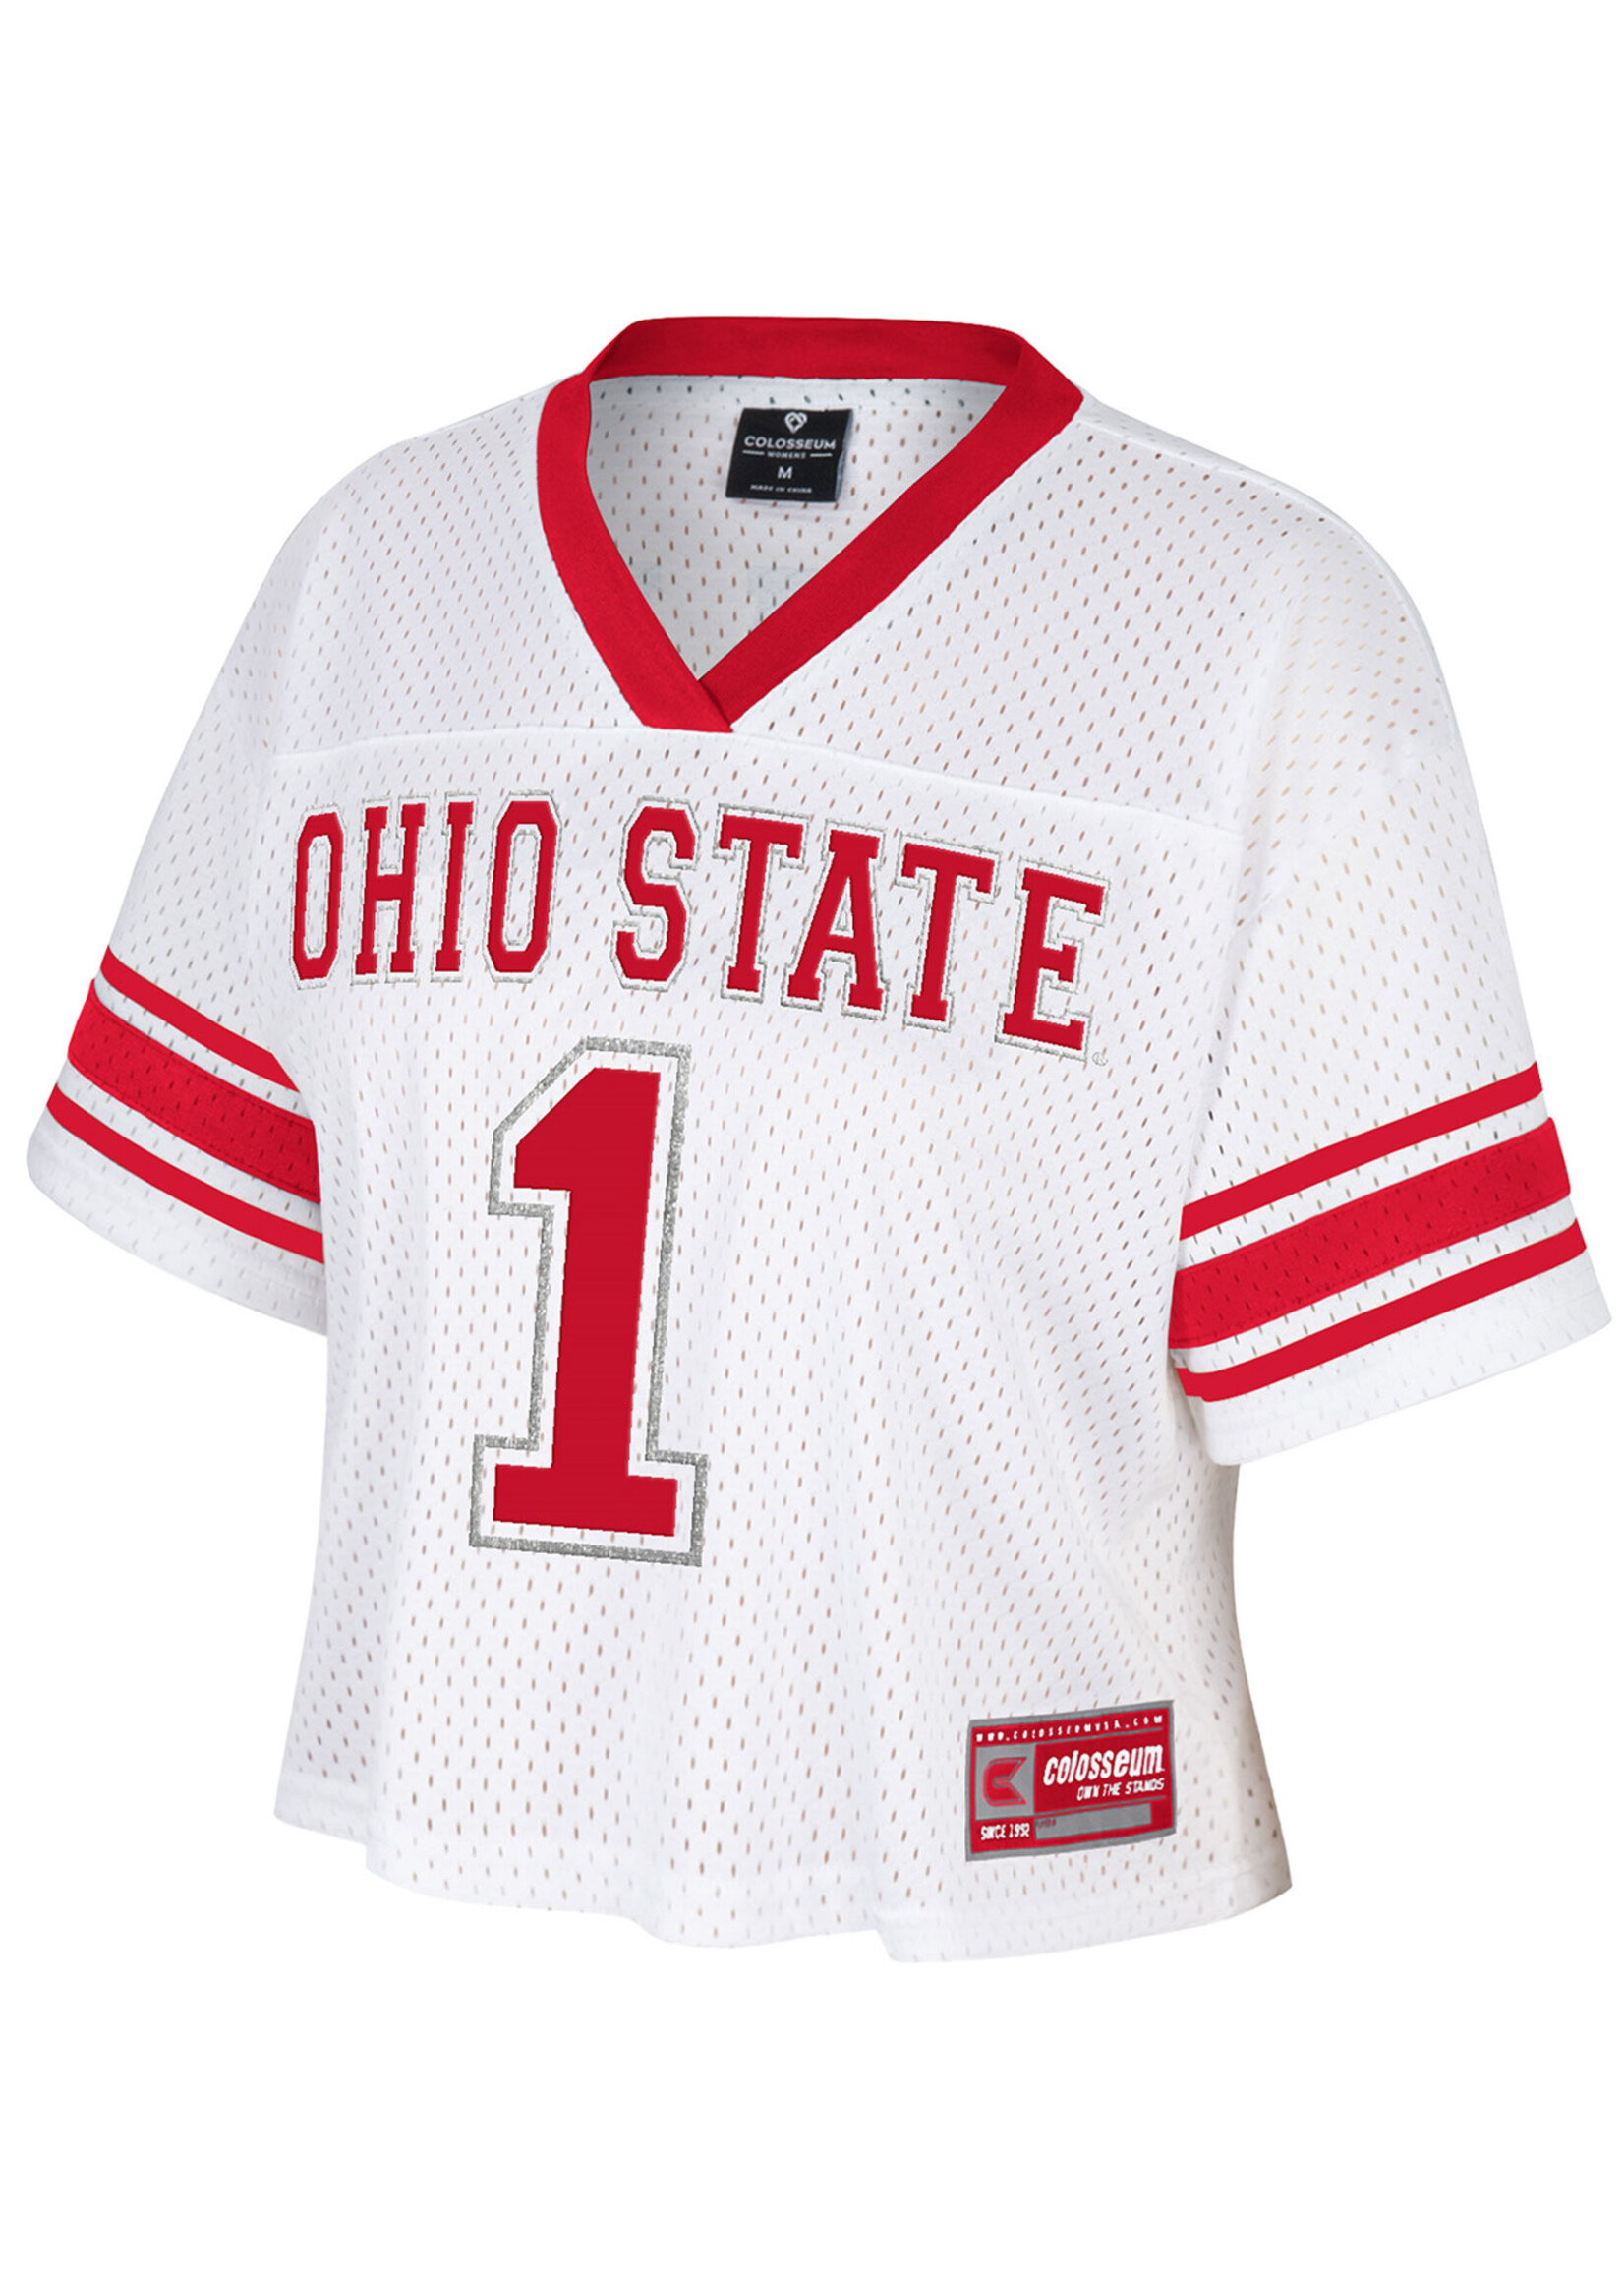 Colosseum Athletics Ohio State Buckeyes Women's White Cropped Jersey